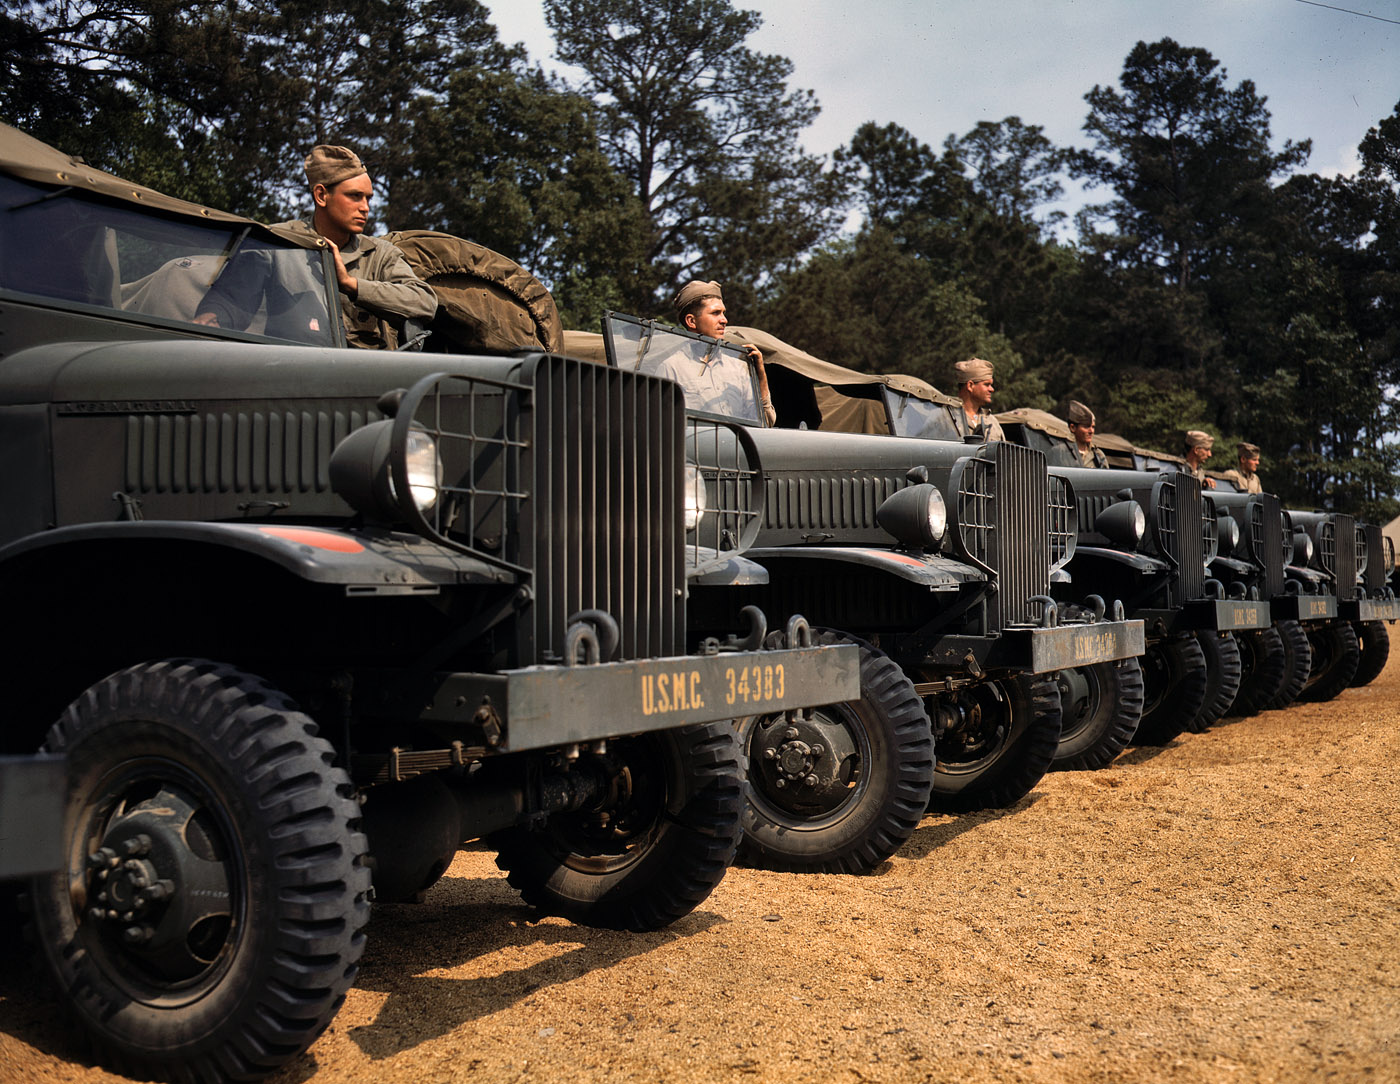 May 1942. Motor detachment at the New River, North Carolina, Marine base. View full size. 4x5 Kodachrome transparency by Alfred Palmer, O.W.I.